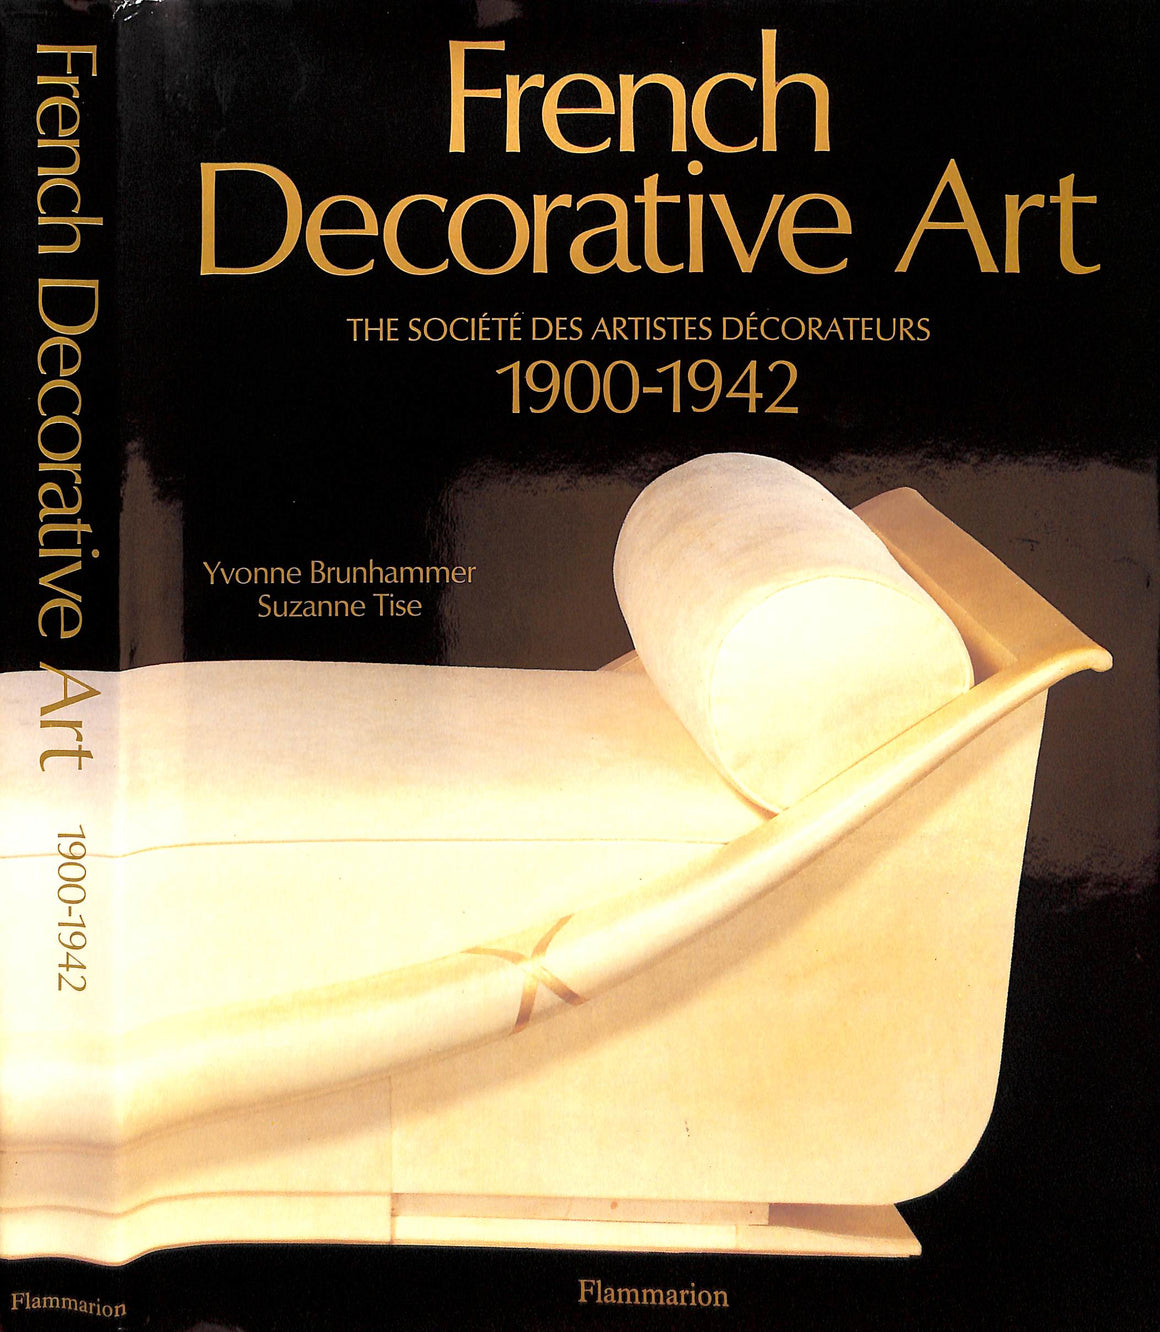 "French Decorative Art: The Societe Des Artistes Decorateurs 1900-1942" 1990 BRUNHAMMER, Yvonne and TISE, Suzanne